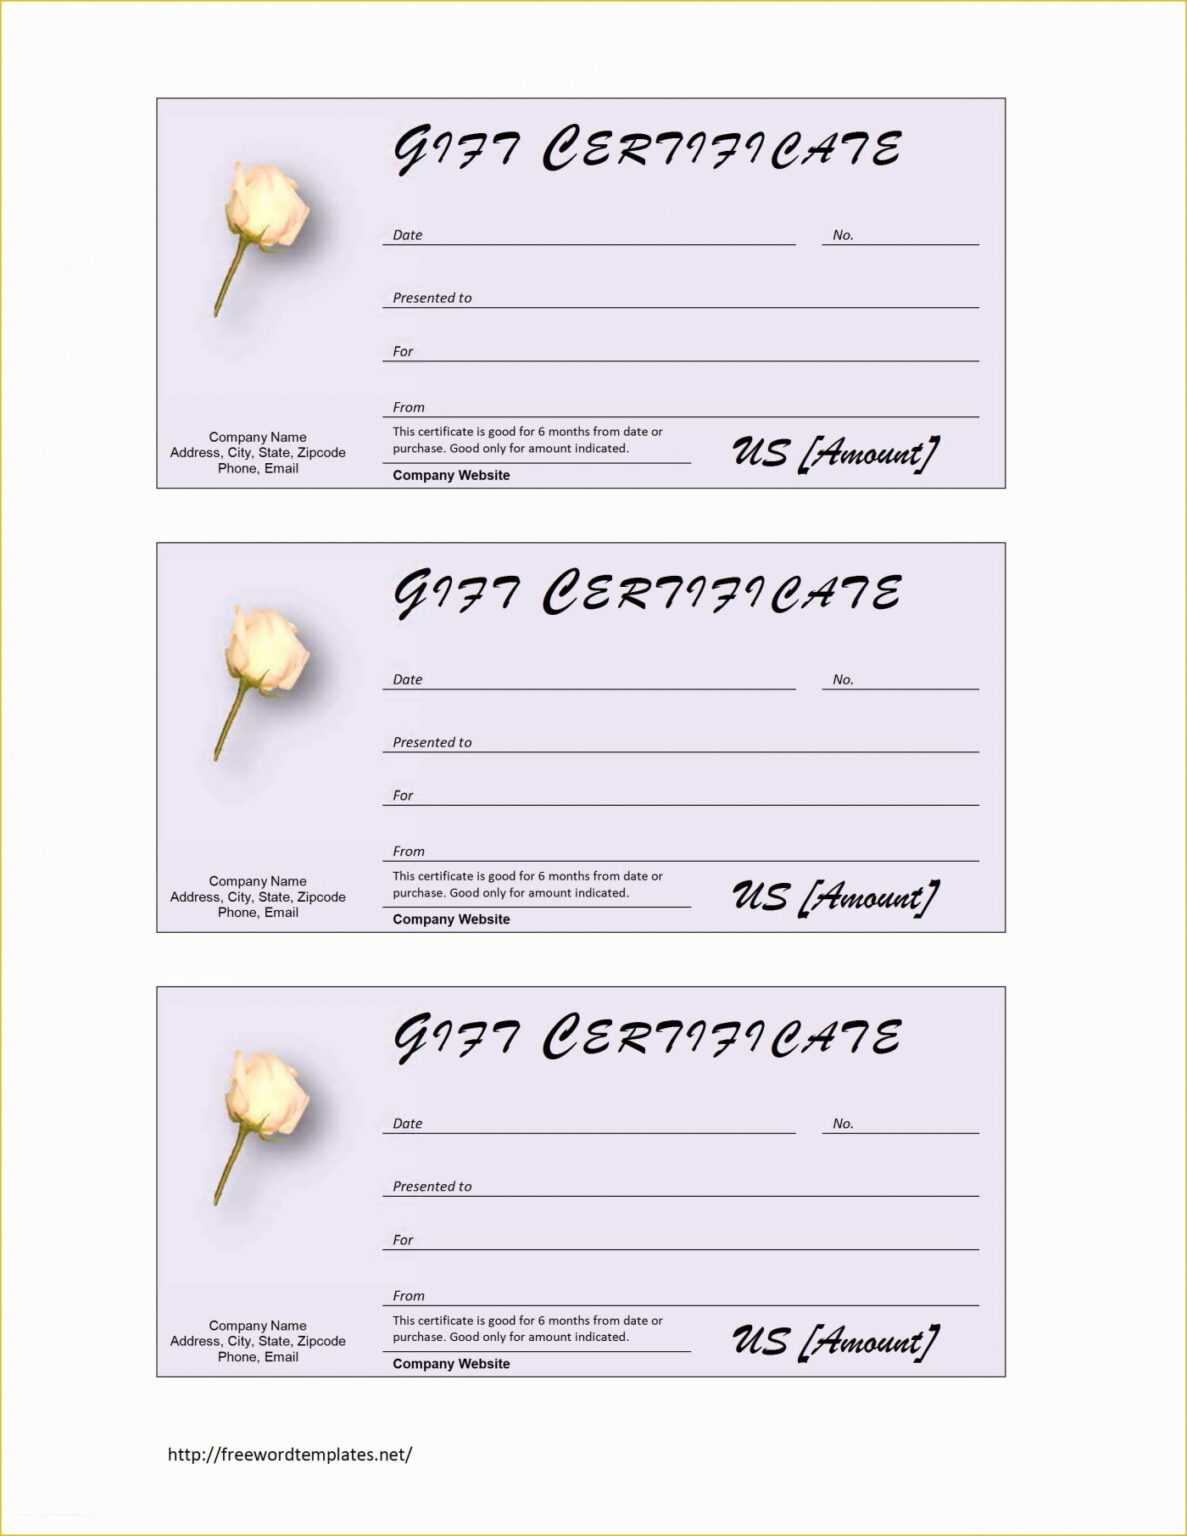 fantastic-massage-gift-certificate-template-free-printable-creating